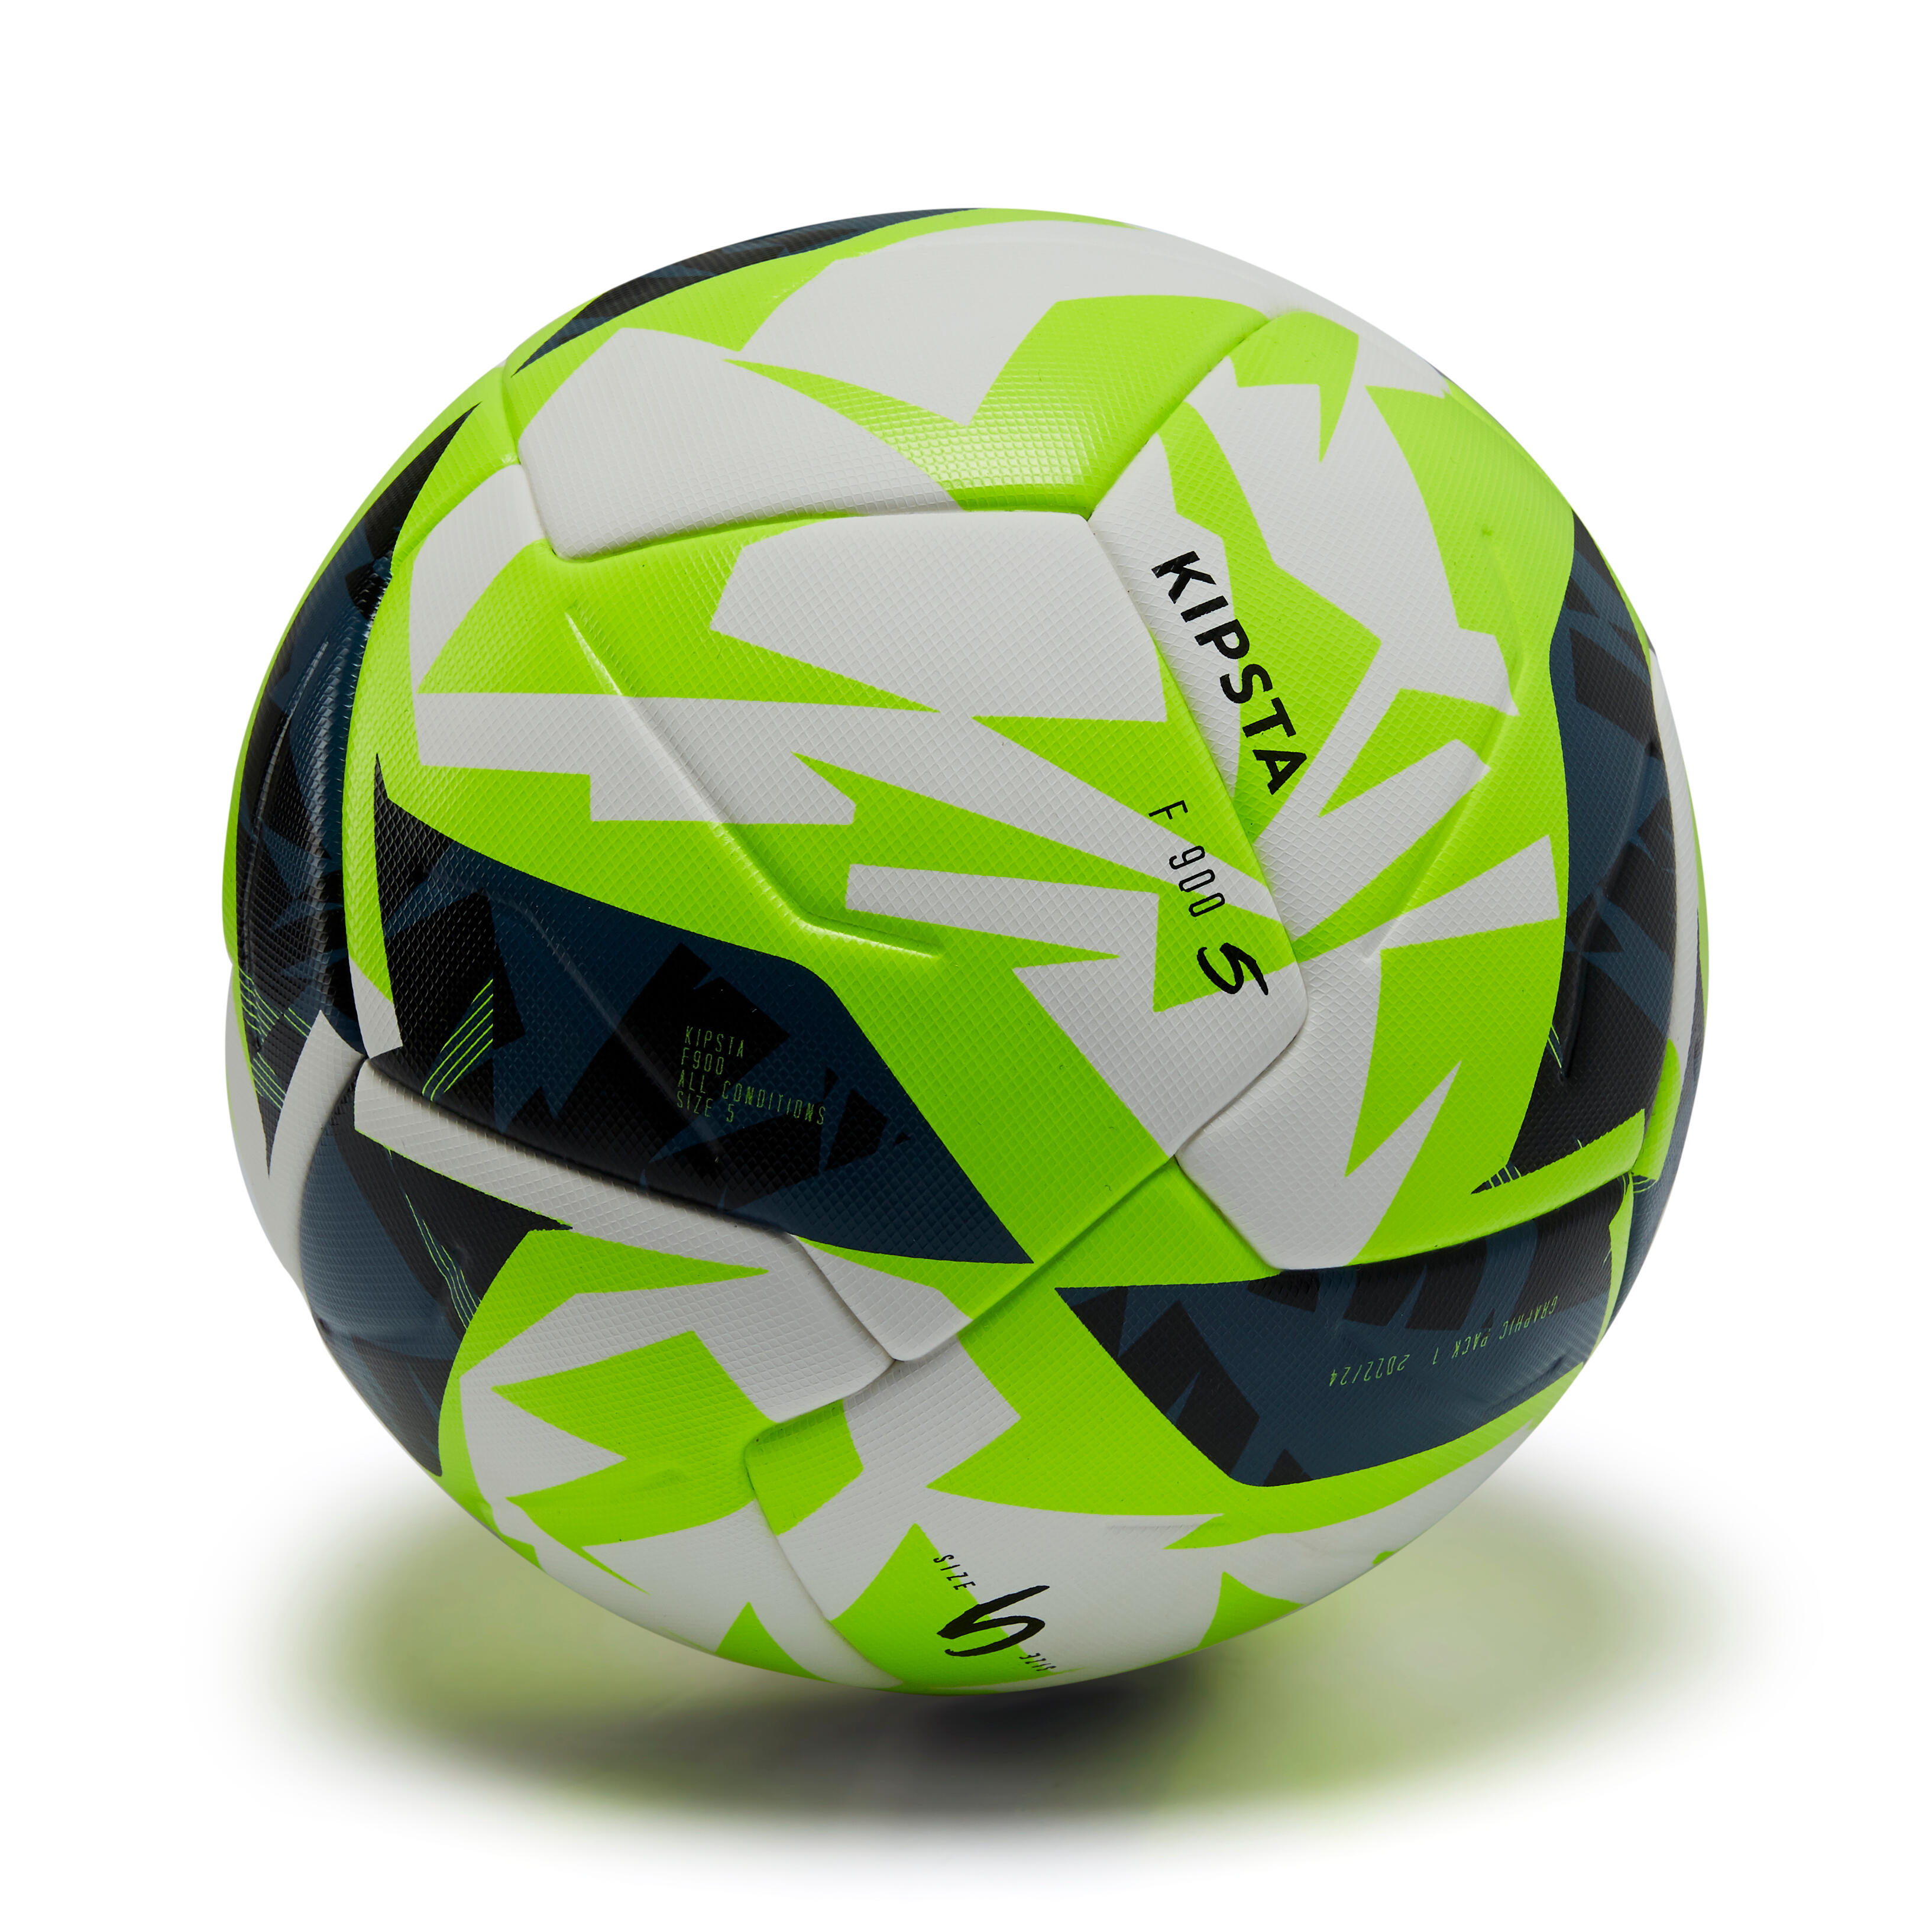 Size 5 FIFA Thermobonded Soccer Ball - F 900 - KIPSTA